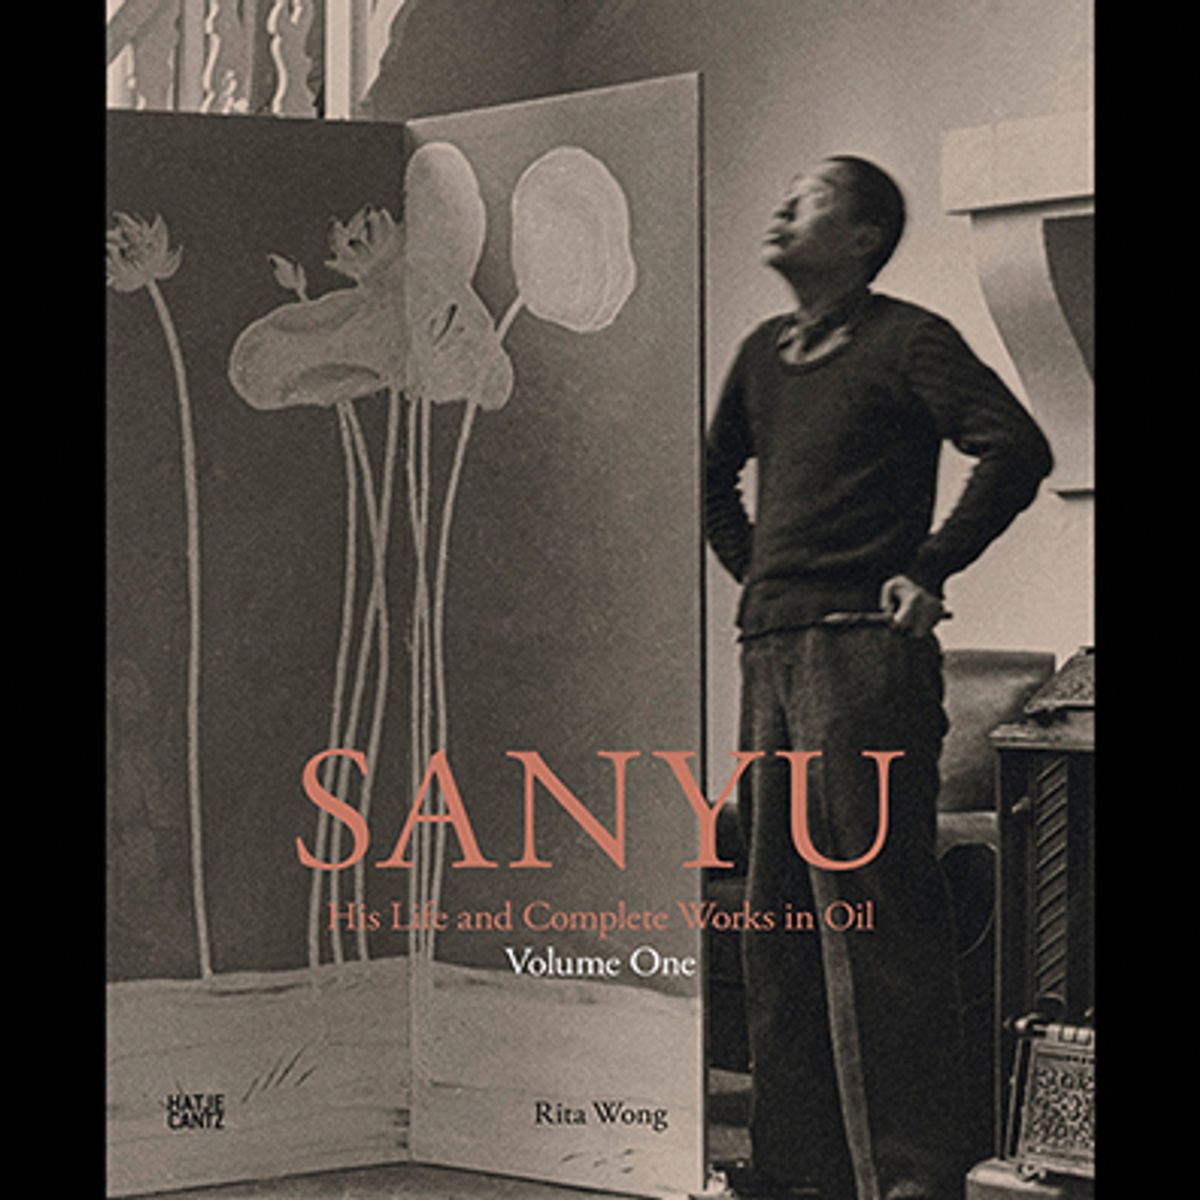 Rita Wong’s Sanyu: His Life and Complete Works in Oil